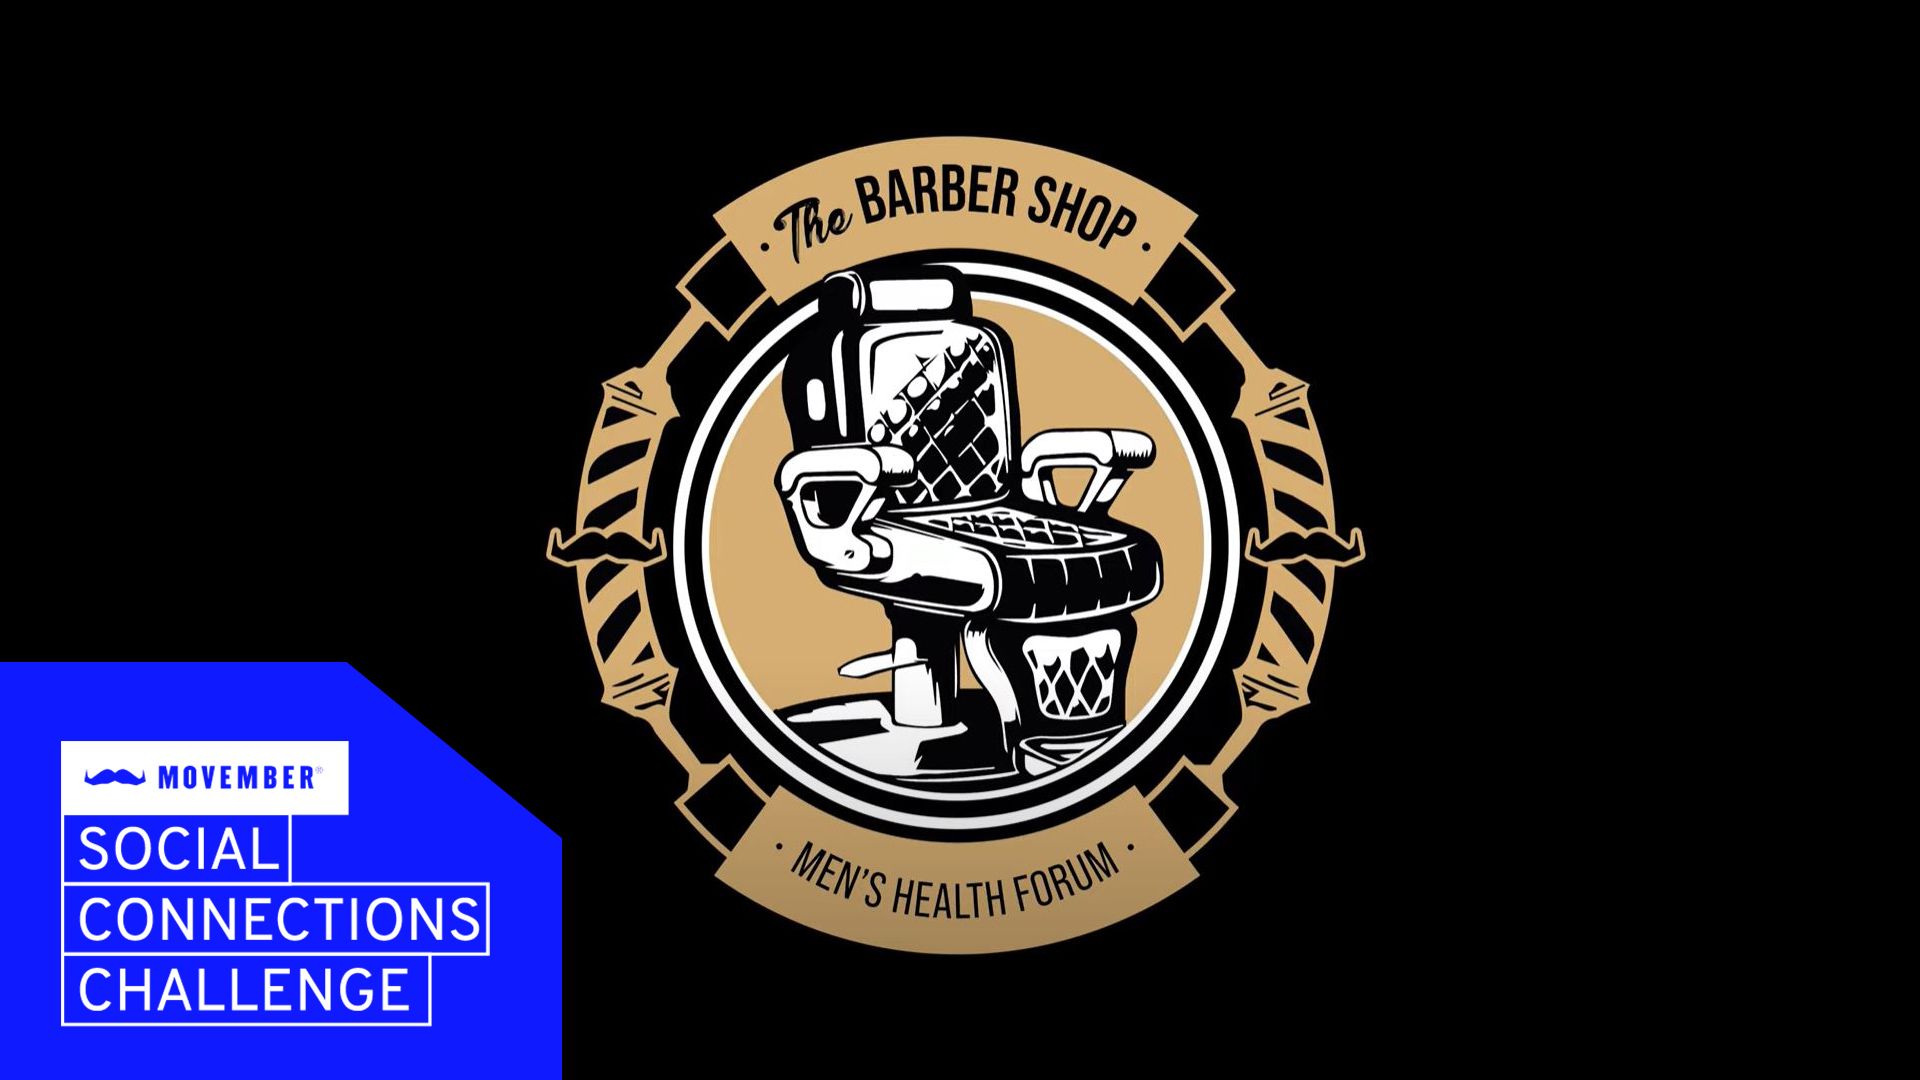 A graphic of a barber chair which says The Barber Chair - Men's Health Forum